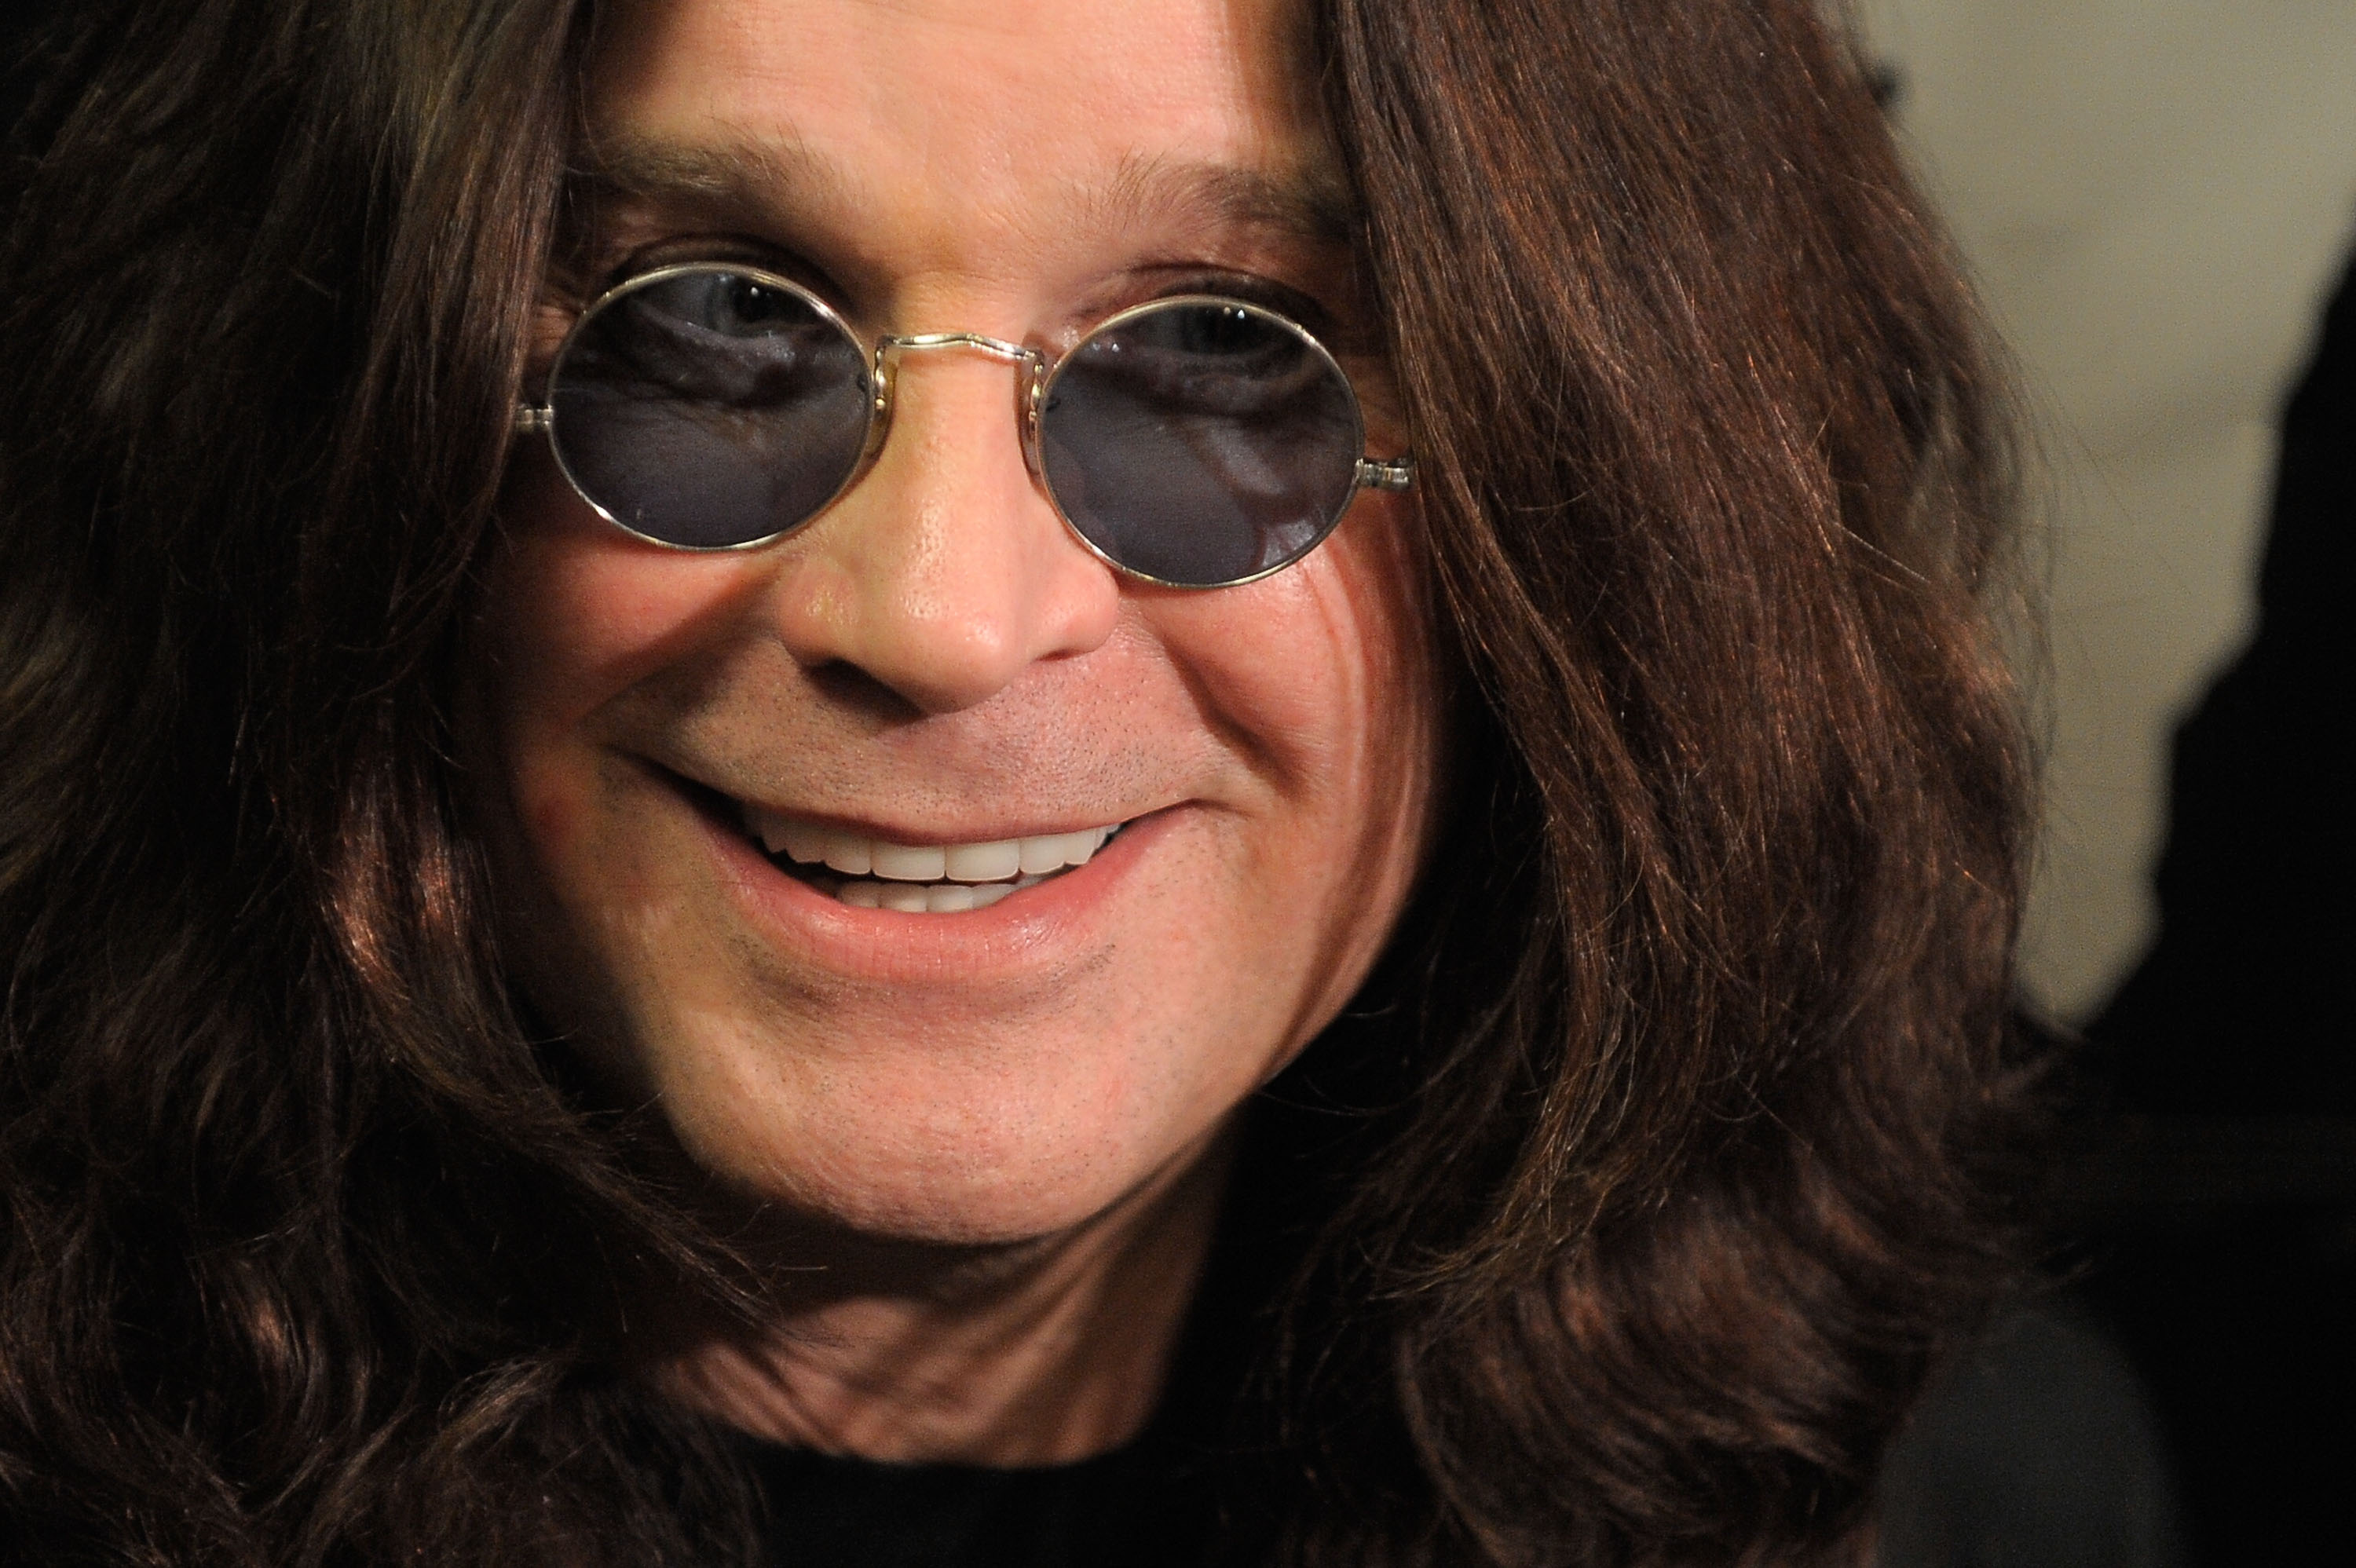 Ozzy Osbourne, Music wallpapers, HQ images, 4K collection, 3000x2000 HD Desktop